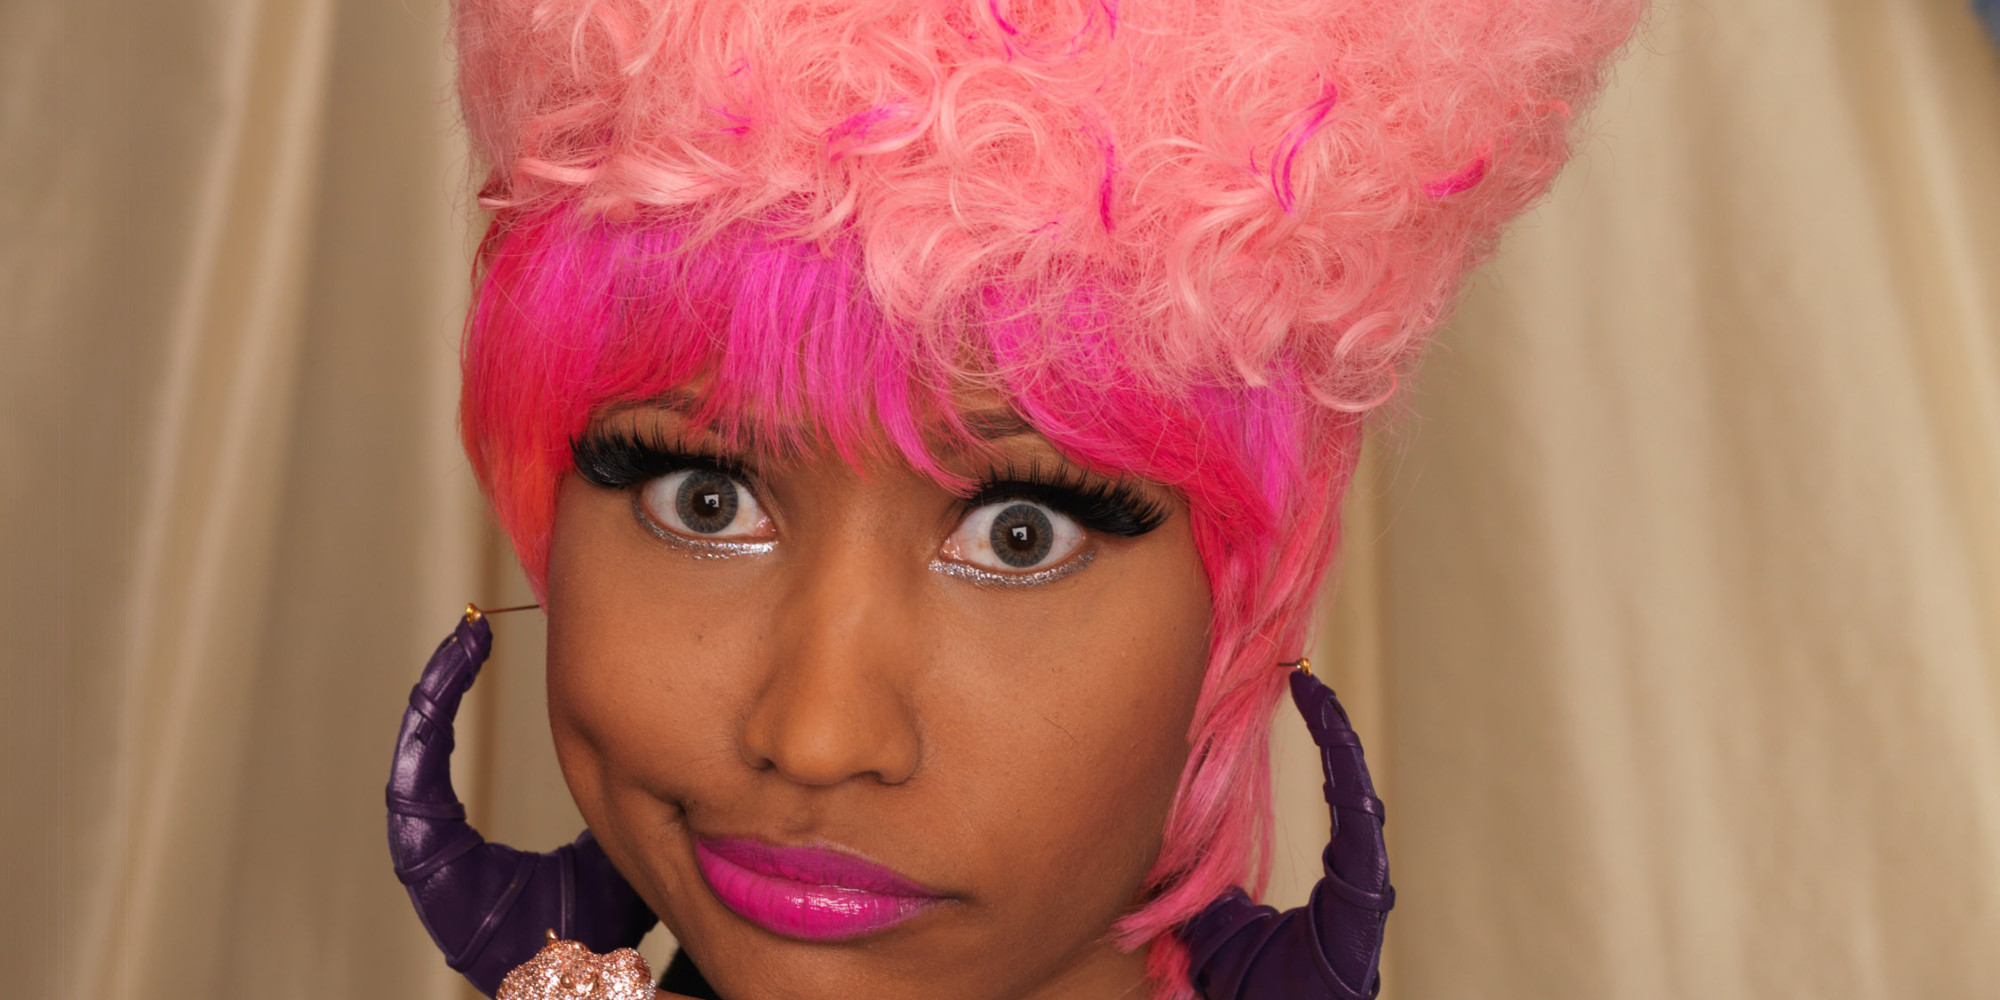 The Real Reason Nicki Minaj Has Gone For A More Natural Look